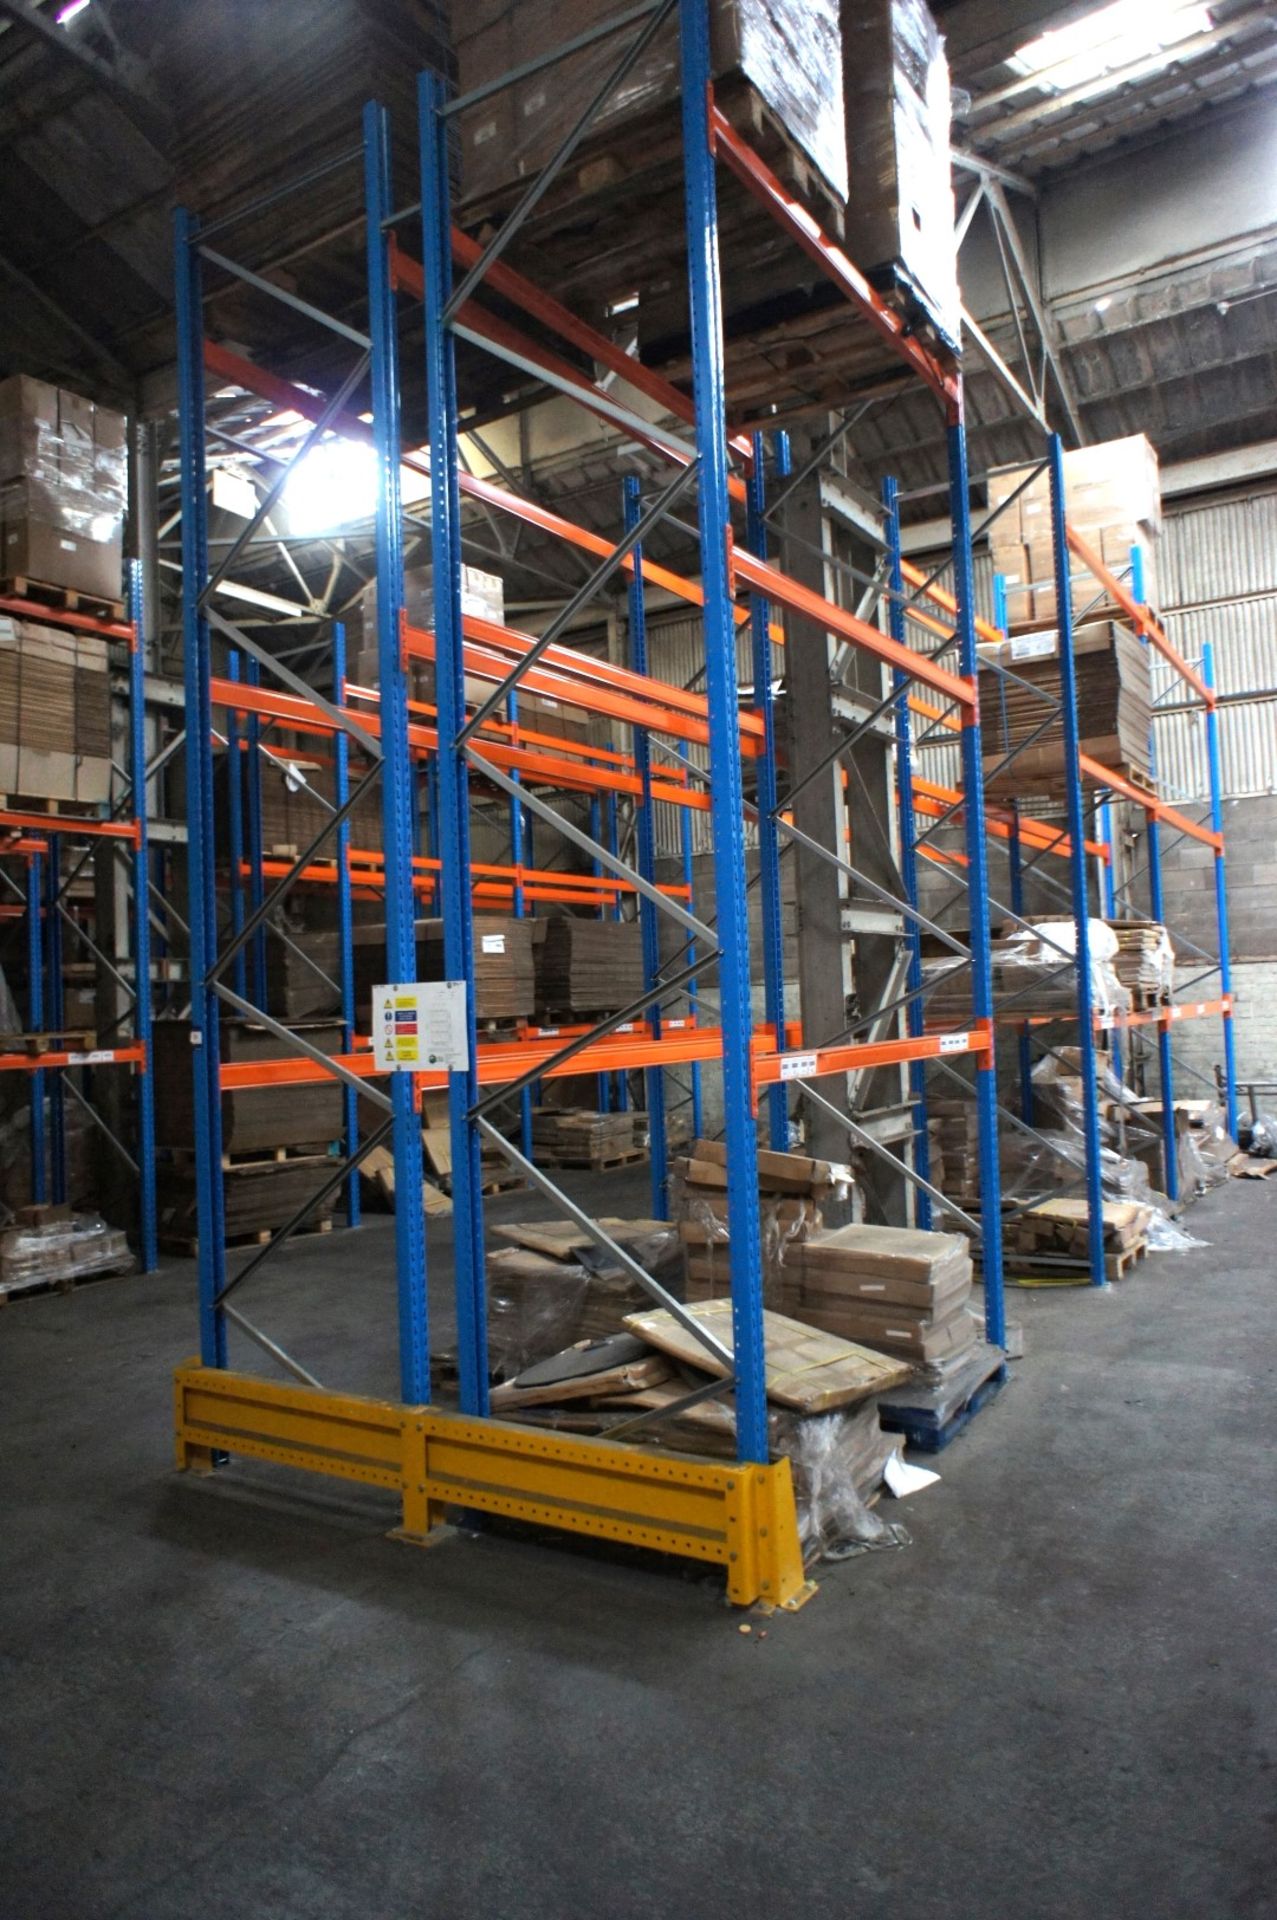 * 6 Bays H Slow 12 Pallet Racking comprising 9 x 5000mm uprights, 24 x 3300mm cross beams and 12 x